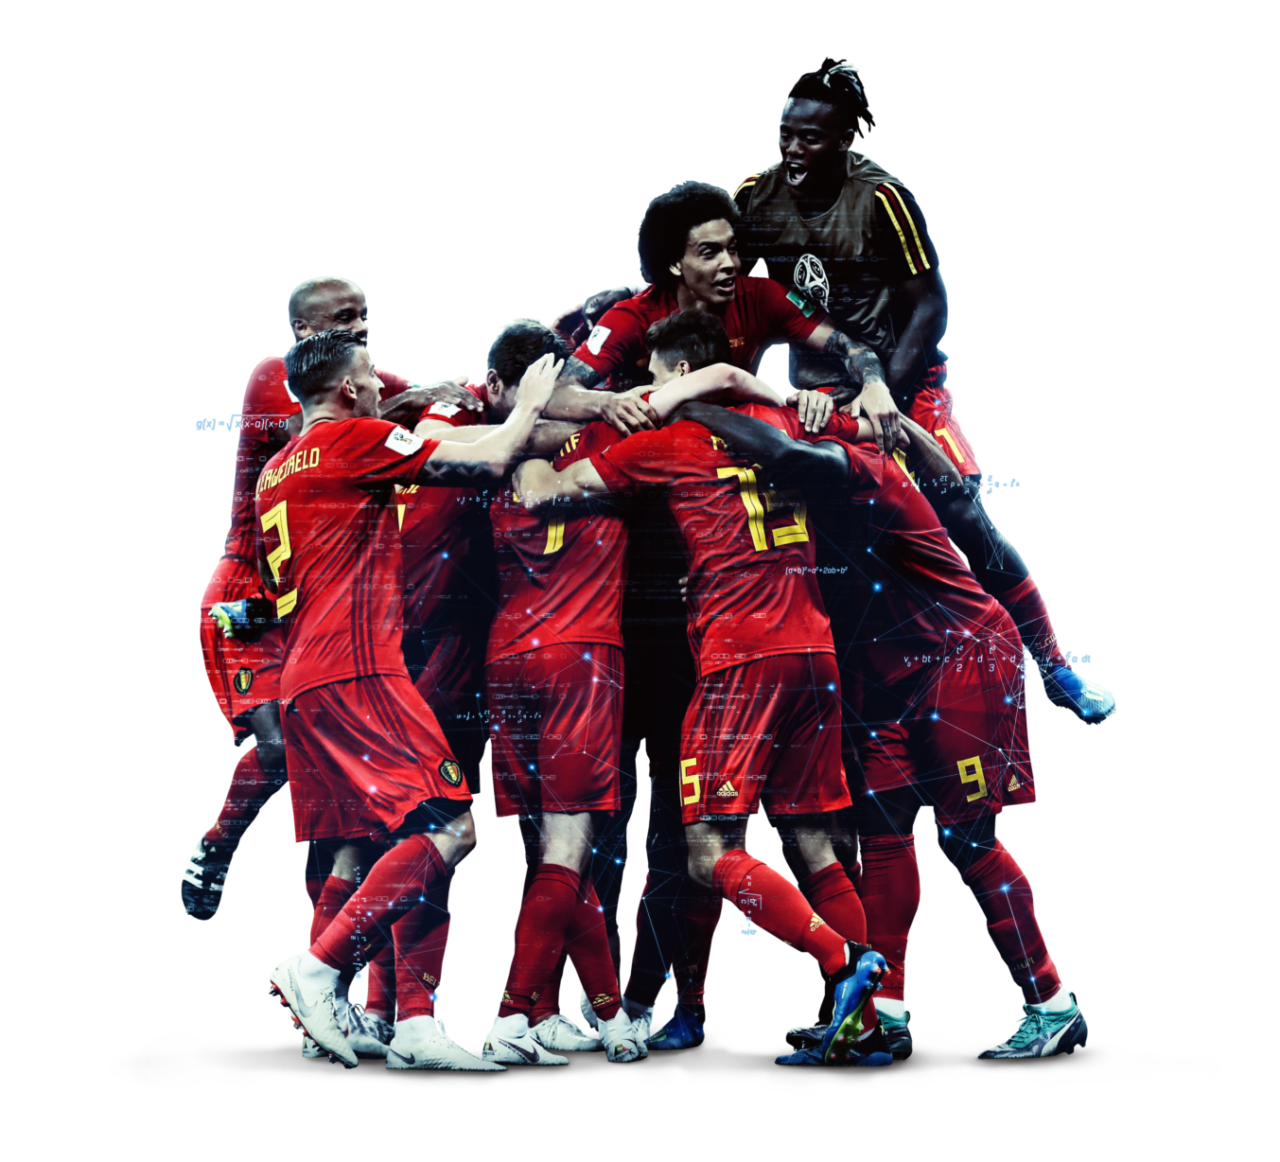 Visualisation of Belgian players celebrating a goal surrounded by data.